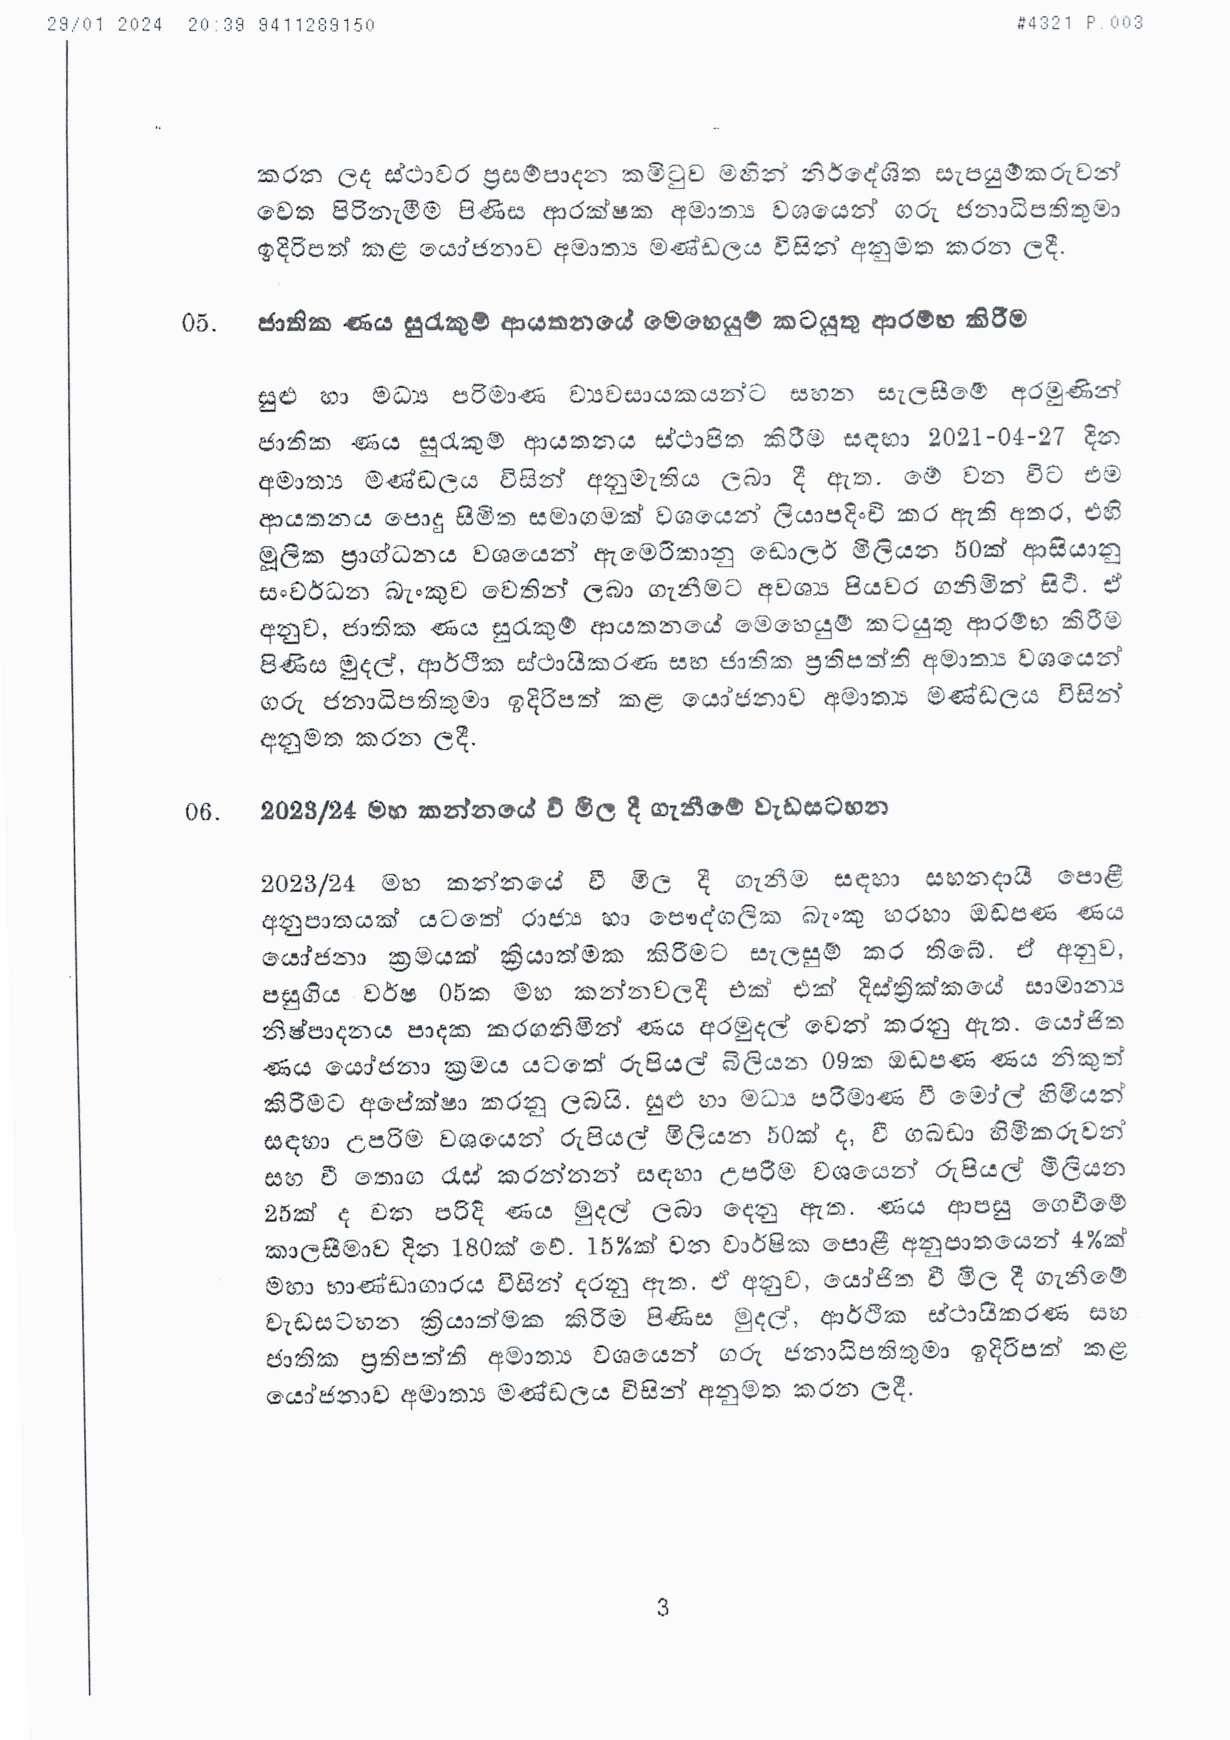 Cabinet Decisions on 29.01.2024 compressed page 003